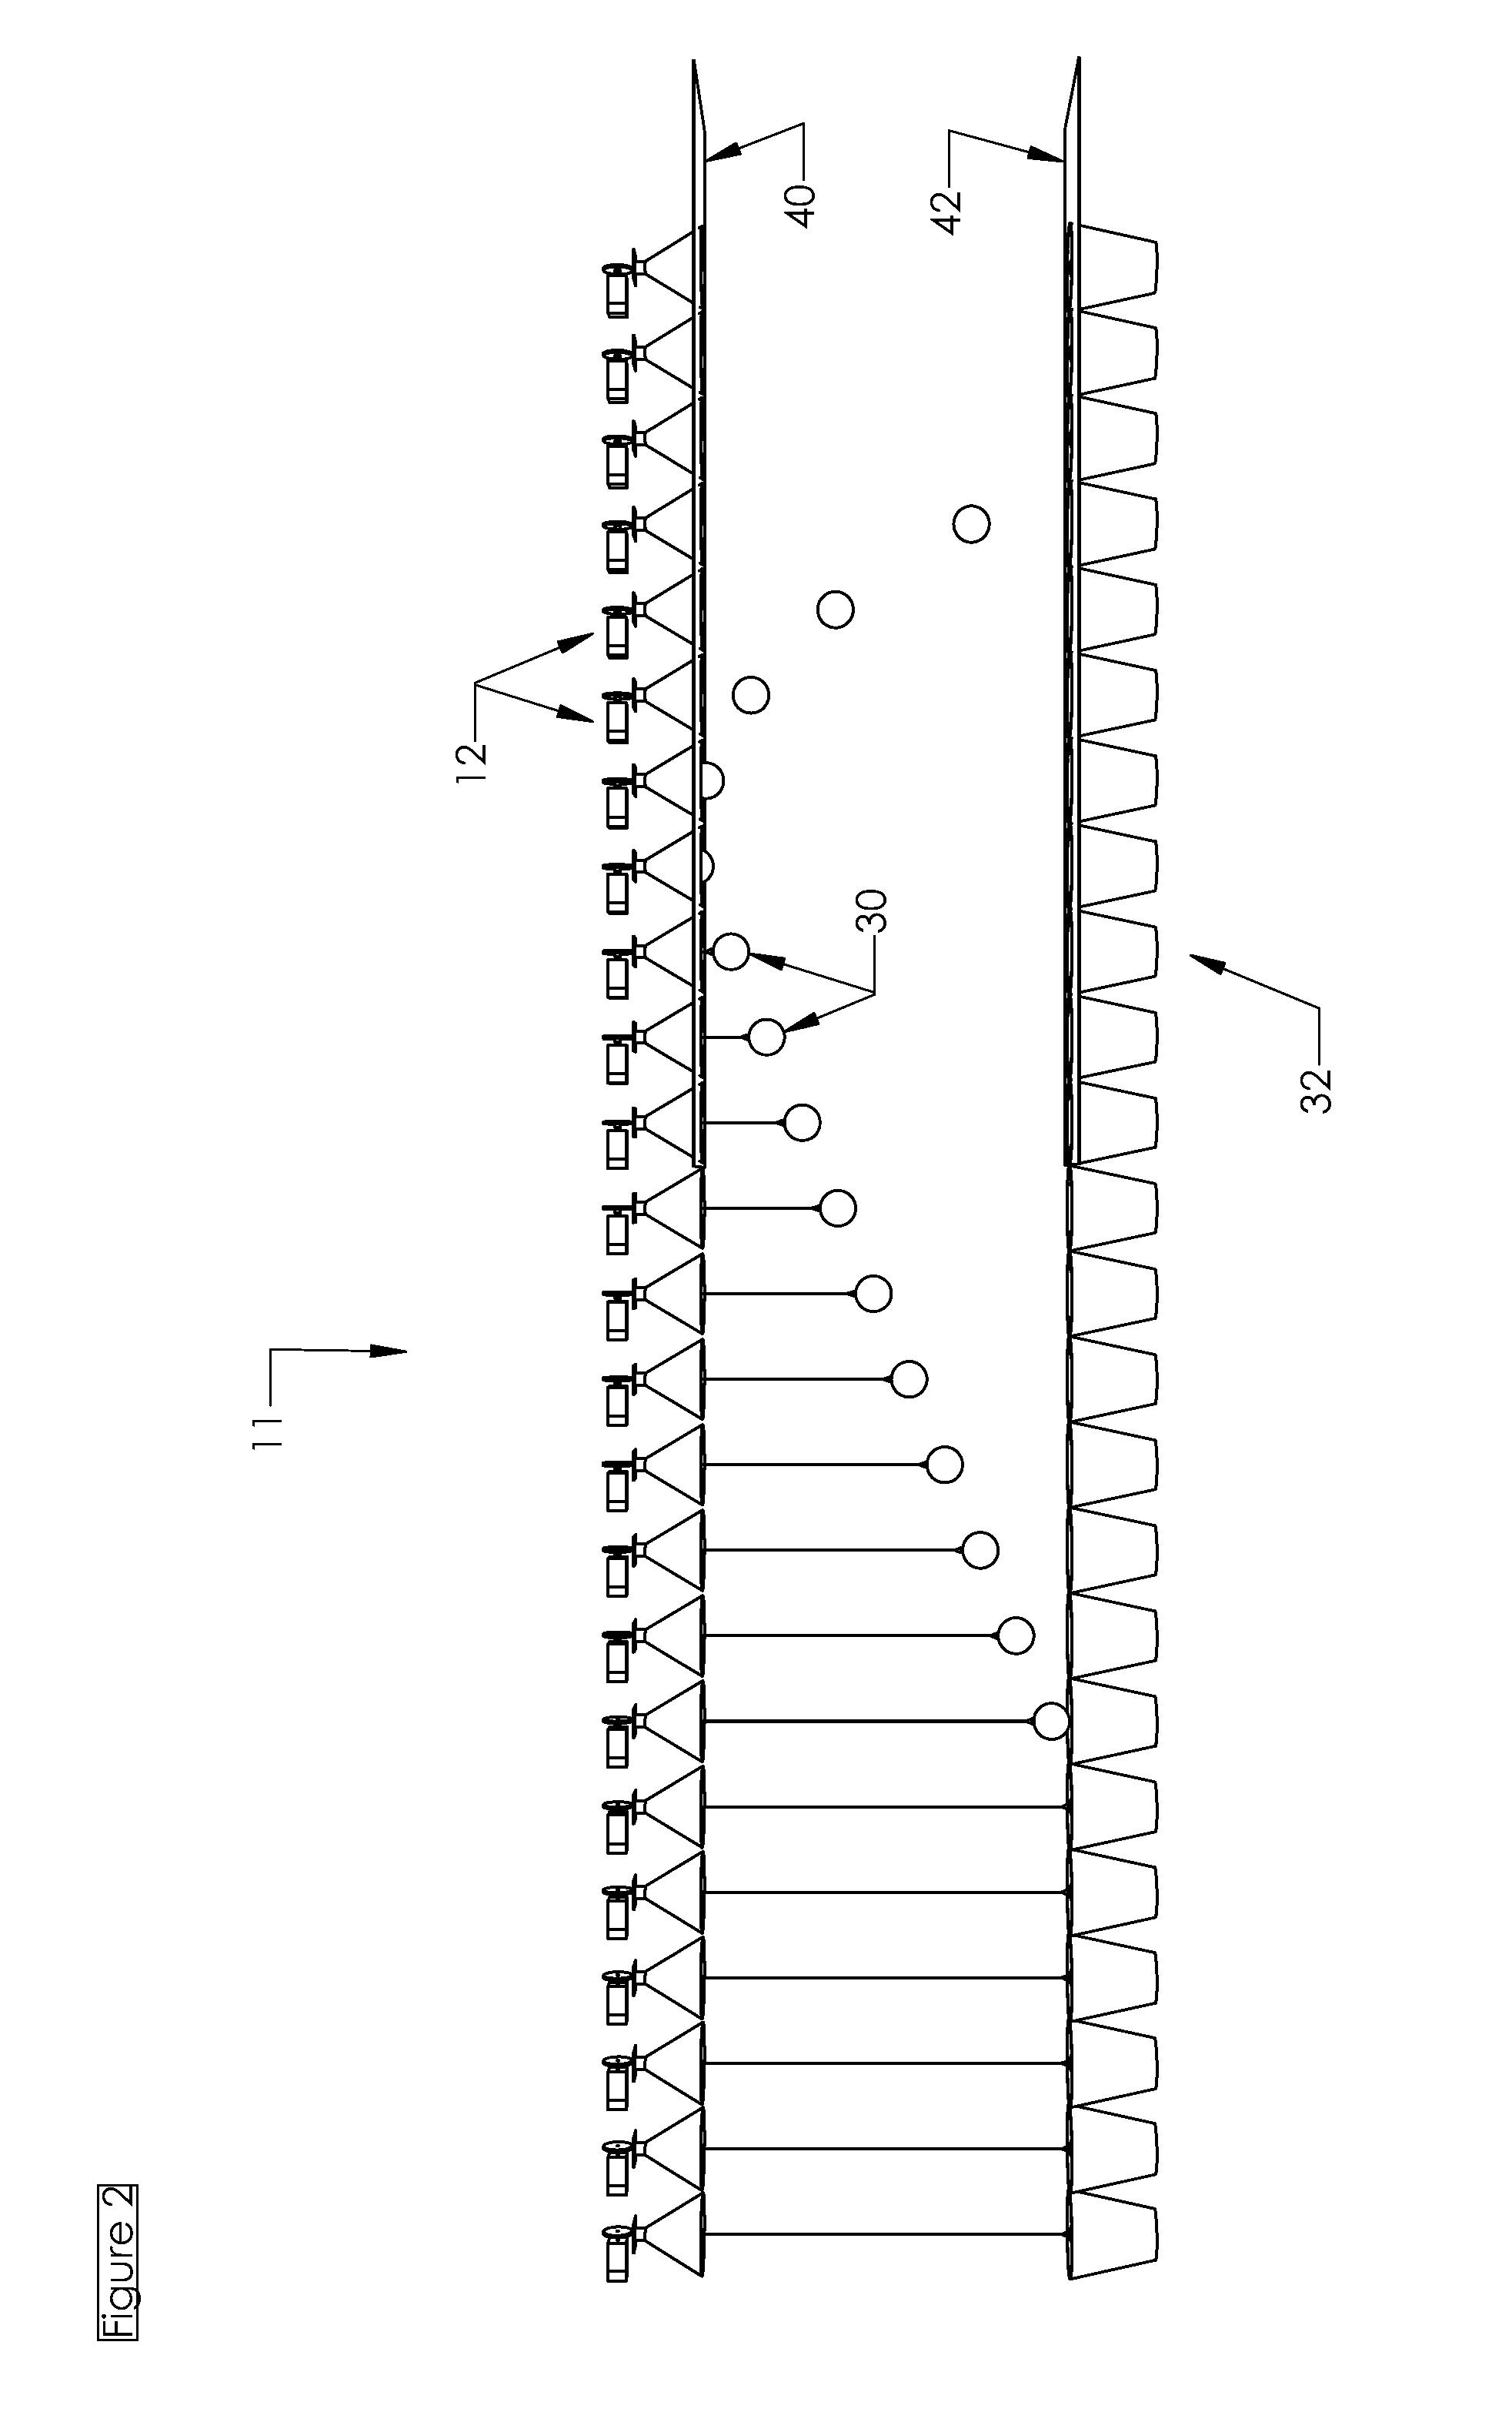 Method and apparatus for producing kinetic imagery